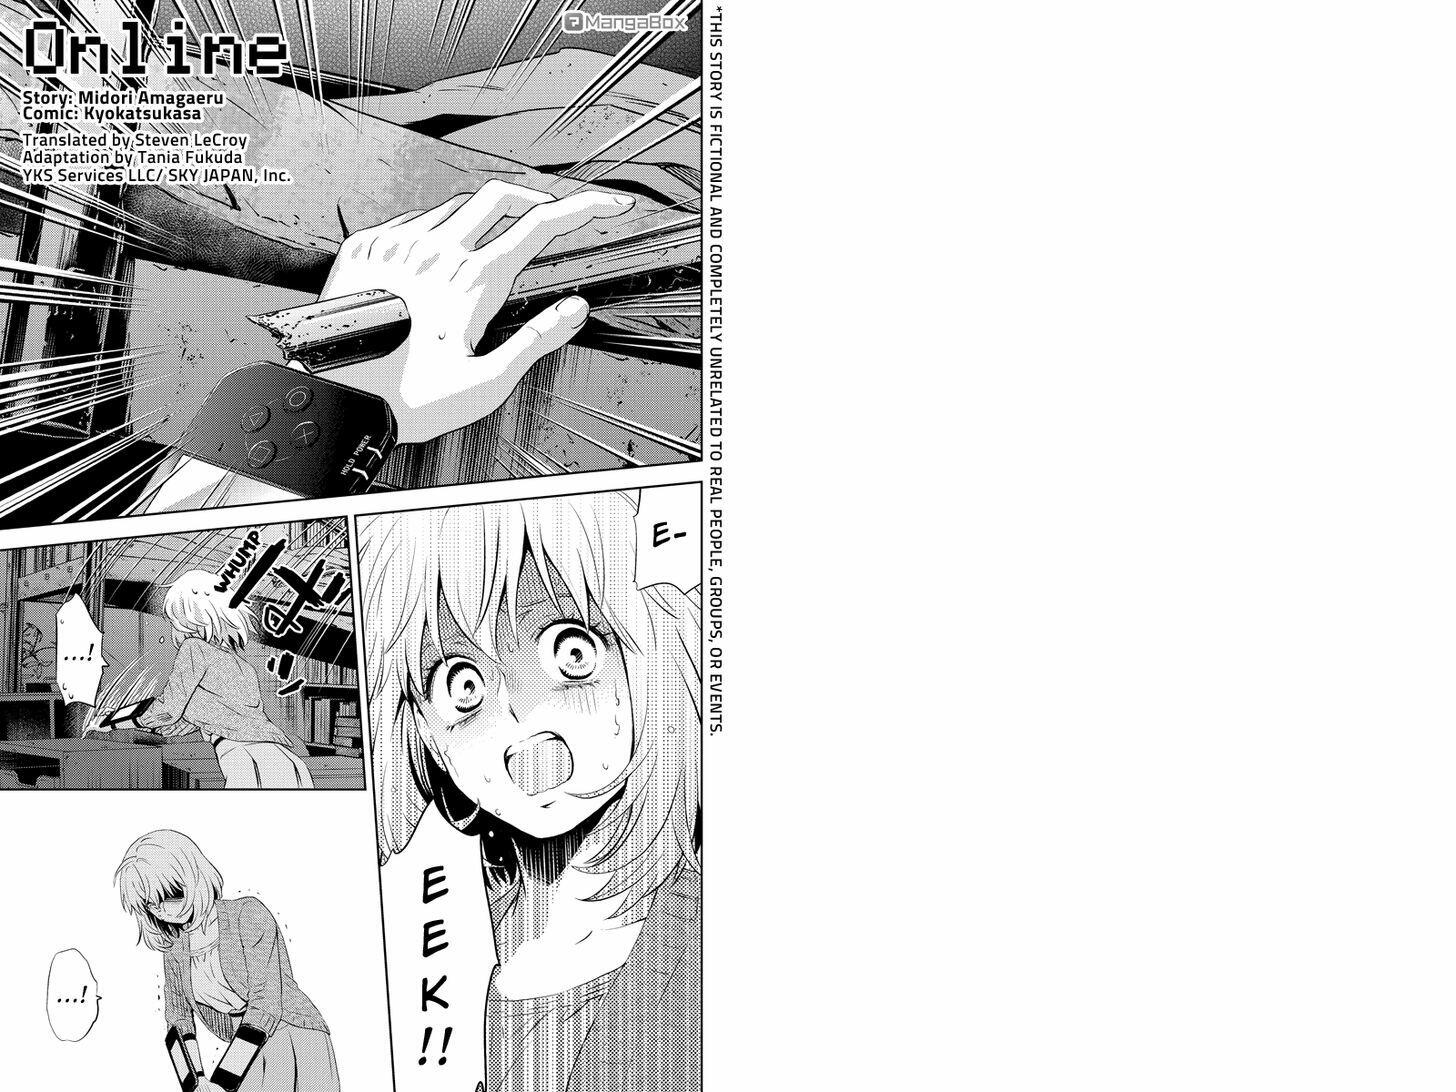 Online The Comic Chapter 16 Read Online The Comic Chapter 16 Online At Allmanga Us Page 1